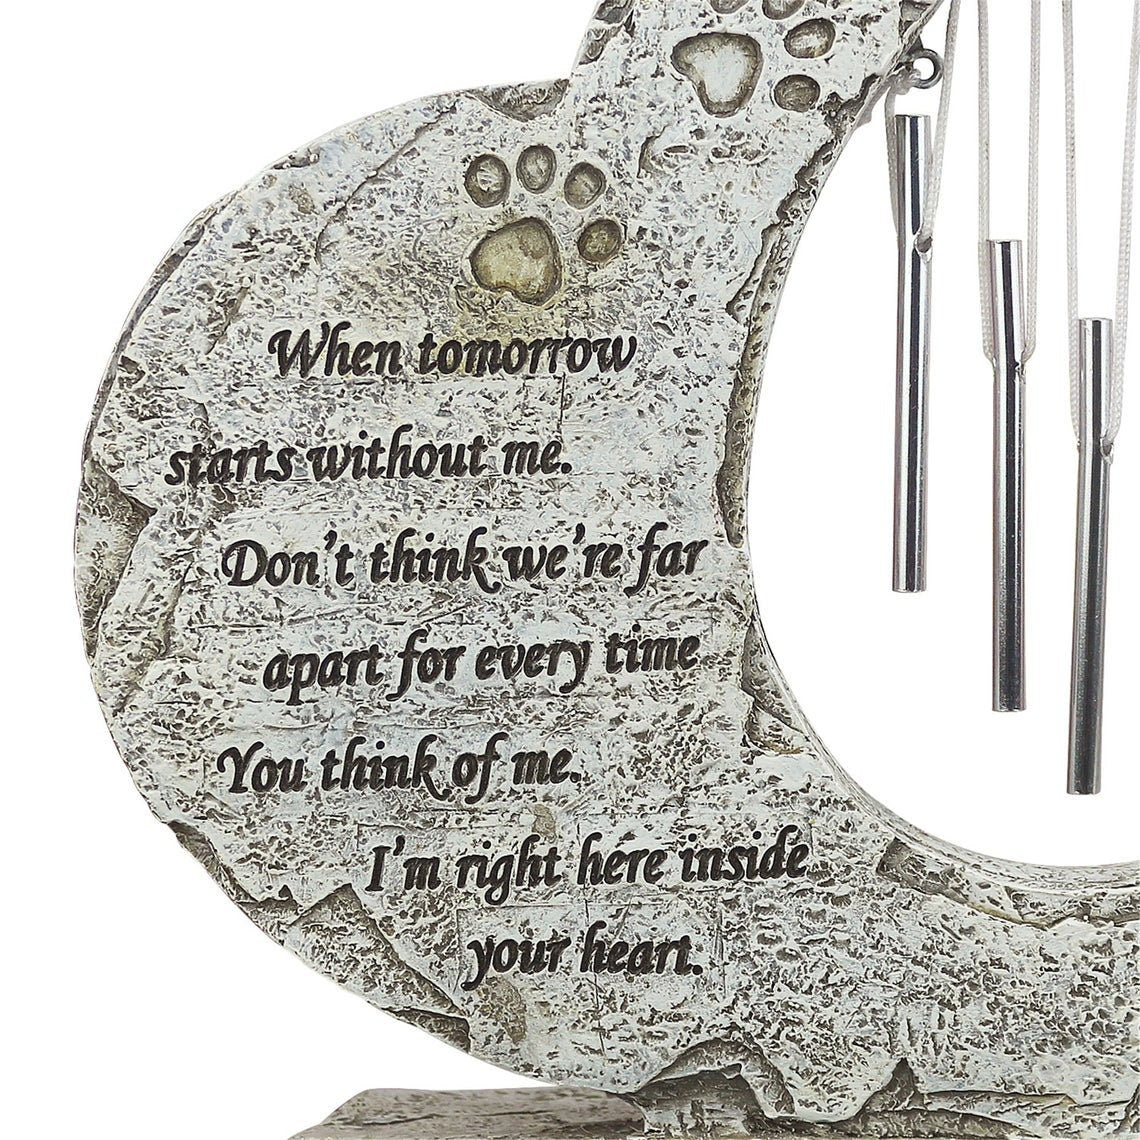 Custom-Engraved Pet Memorial Stone with Wind Chimes